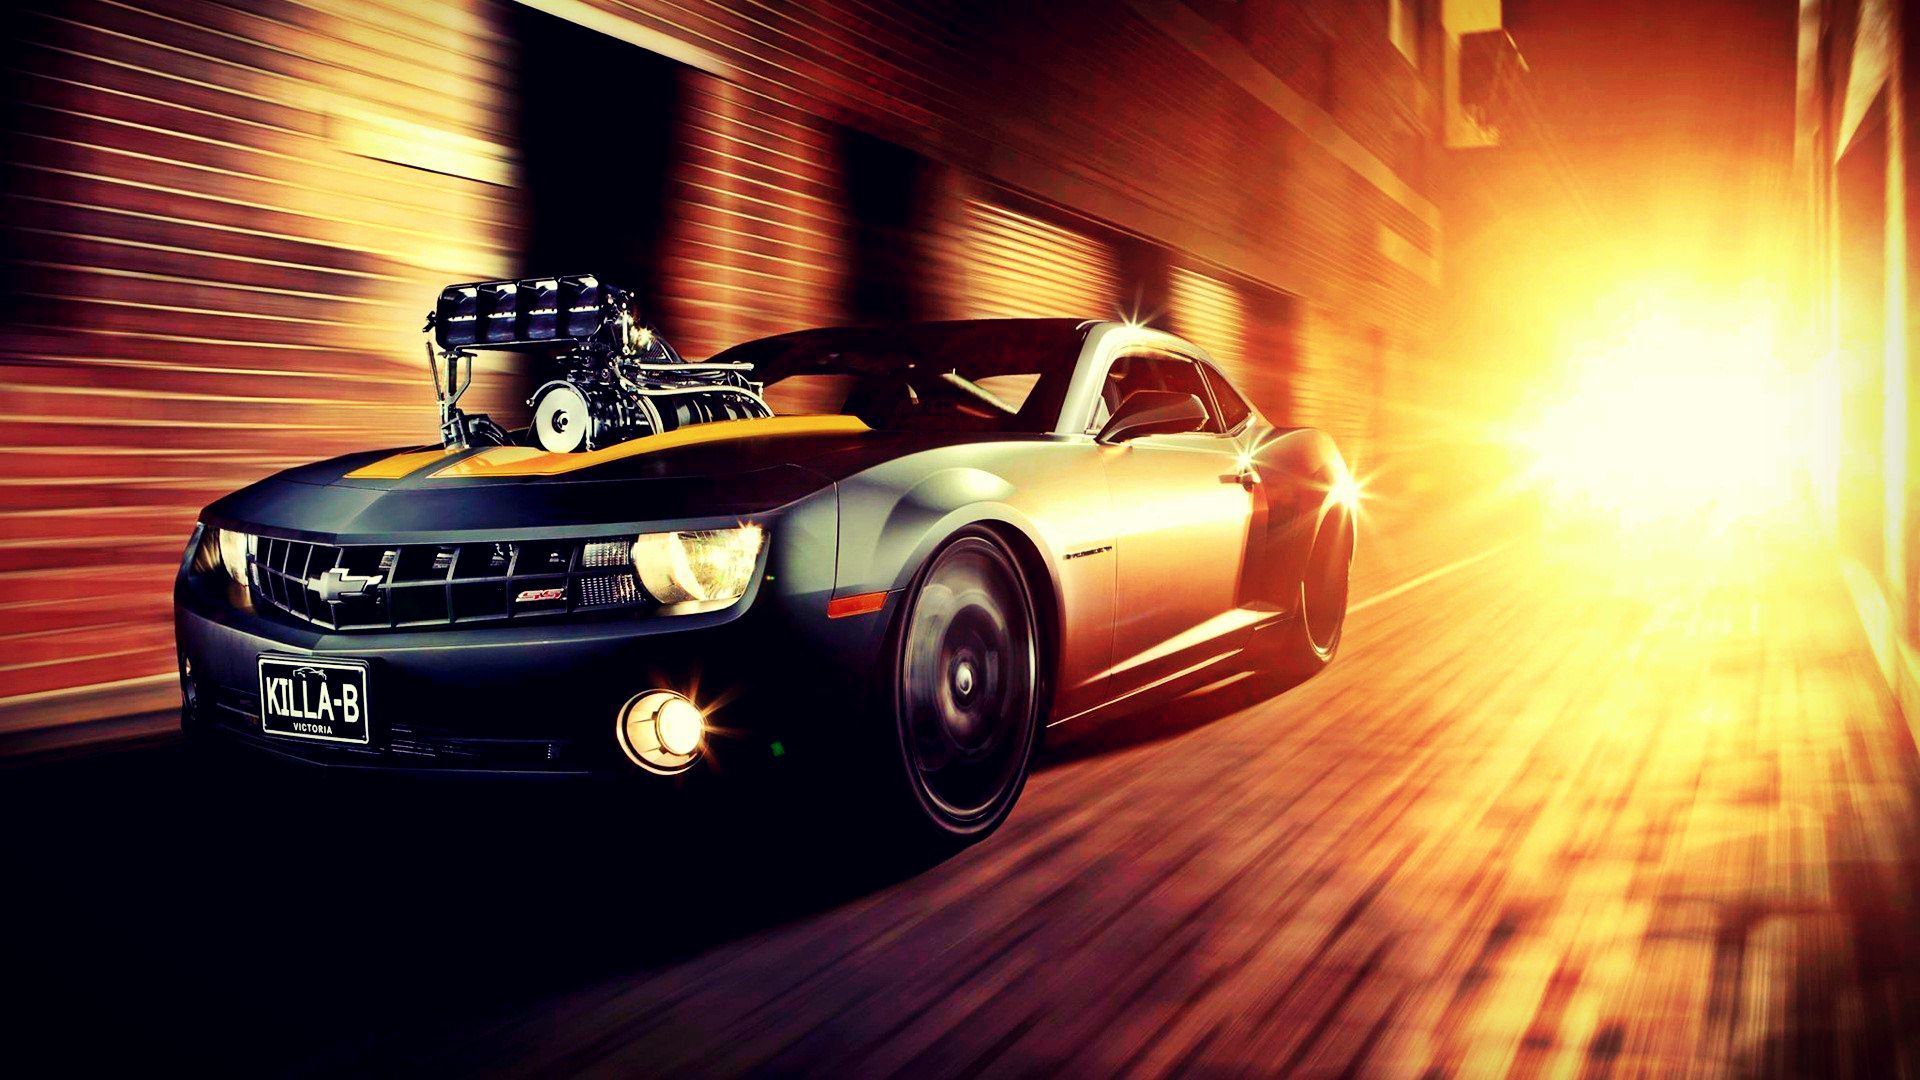 28+ Cool Cars Edited Pics Wallpaper For Computer free download